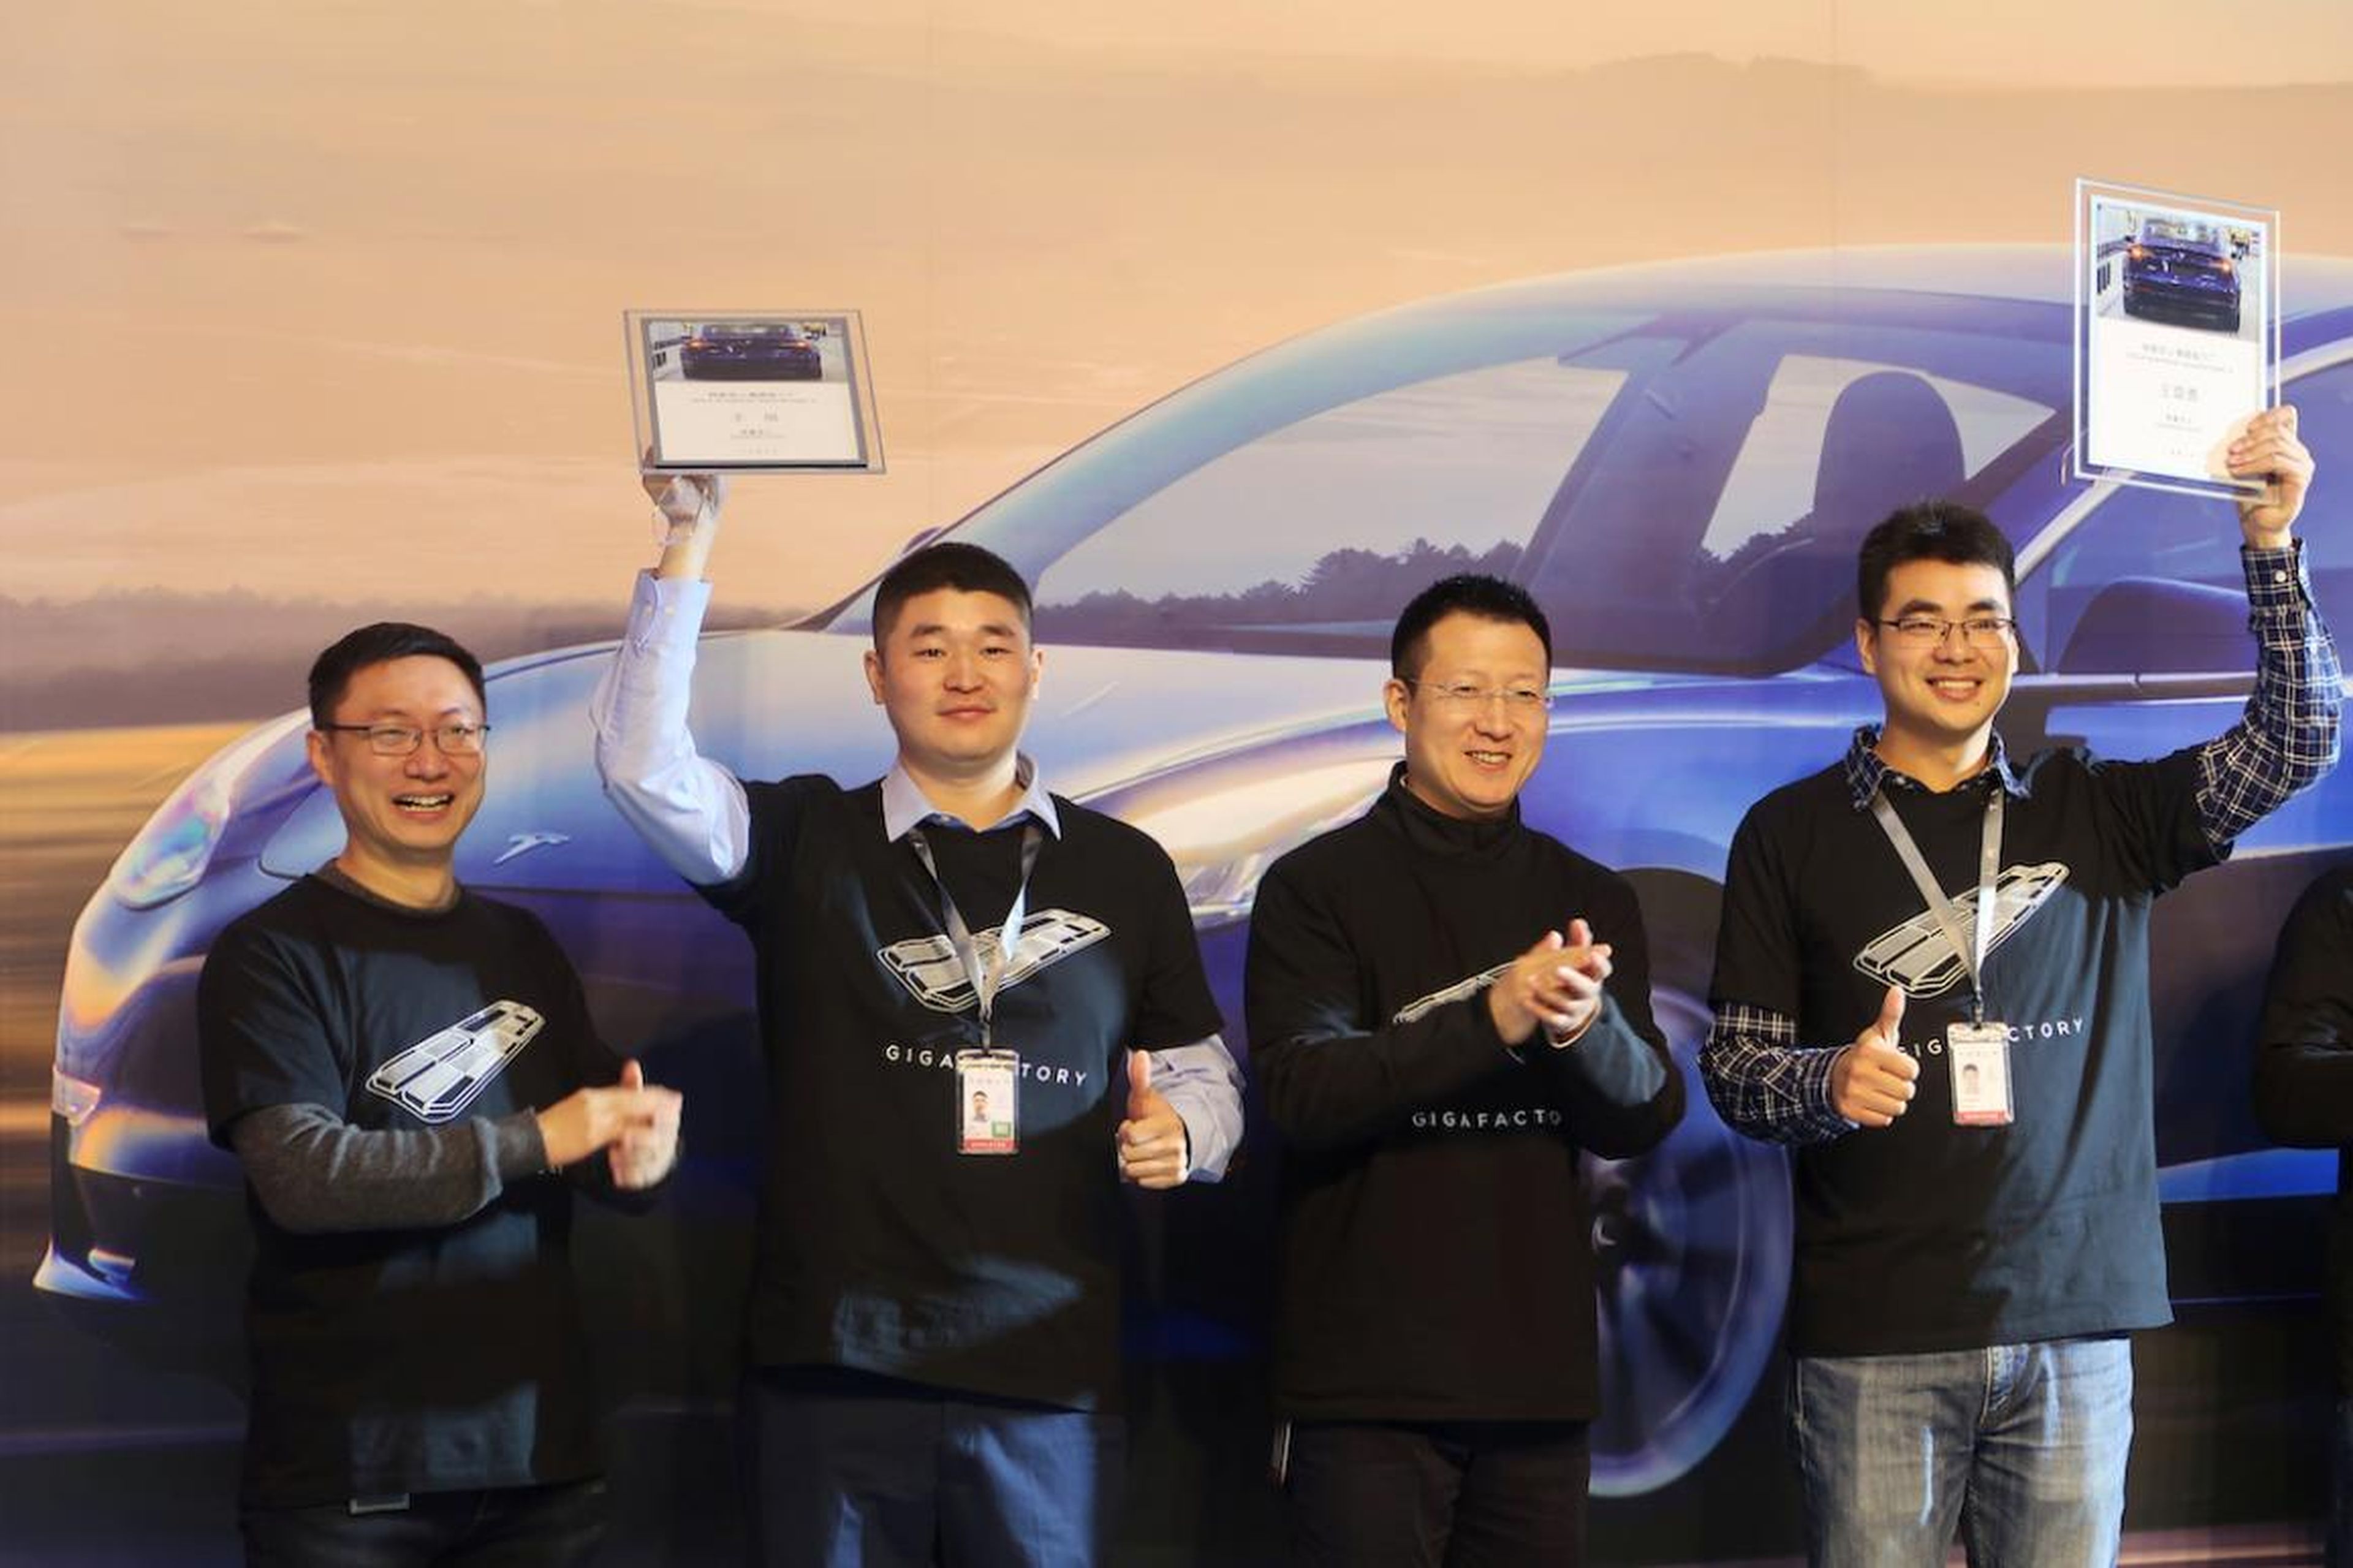 "From now onwards China-made Model 3 vehicles will start running on China's large streets and small lanes," Tesla Vice President Tao Lin said at the delivery ceremony which was attended by employees and Shanghai government